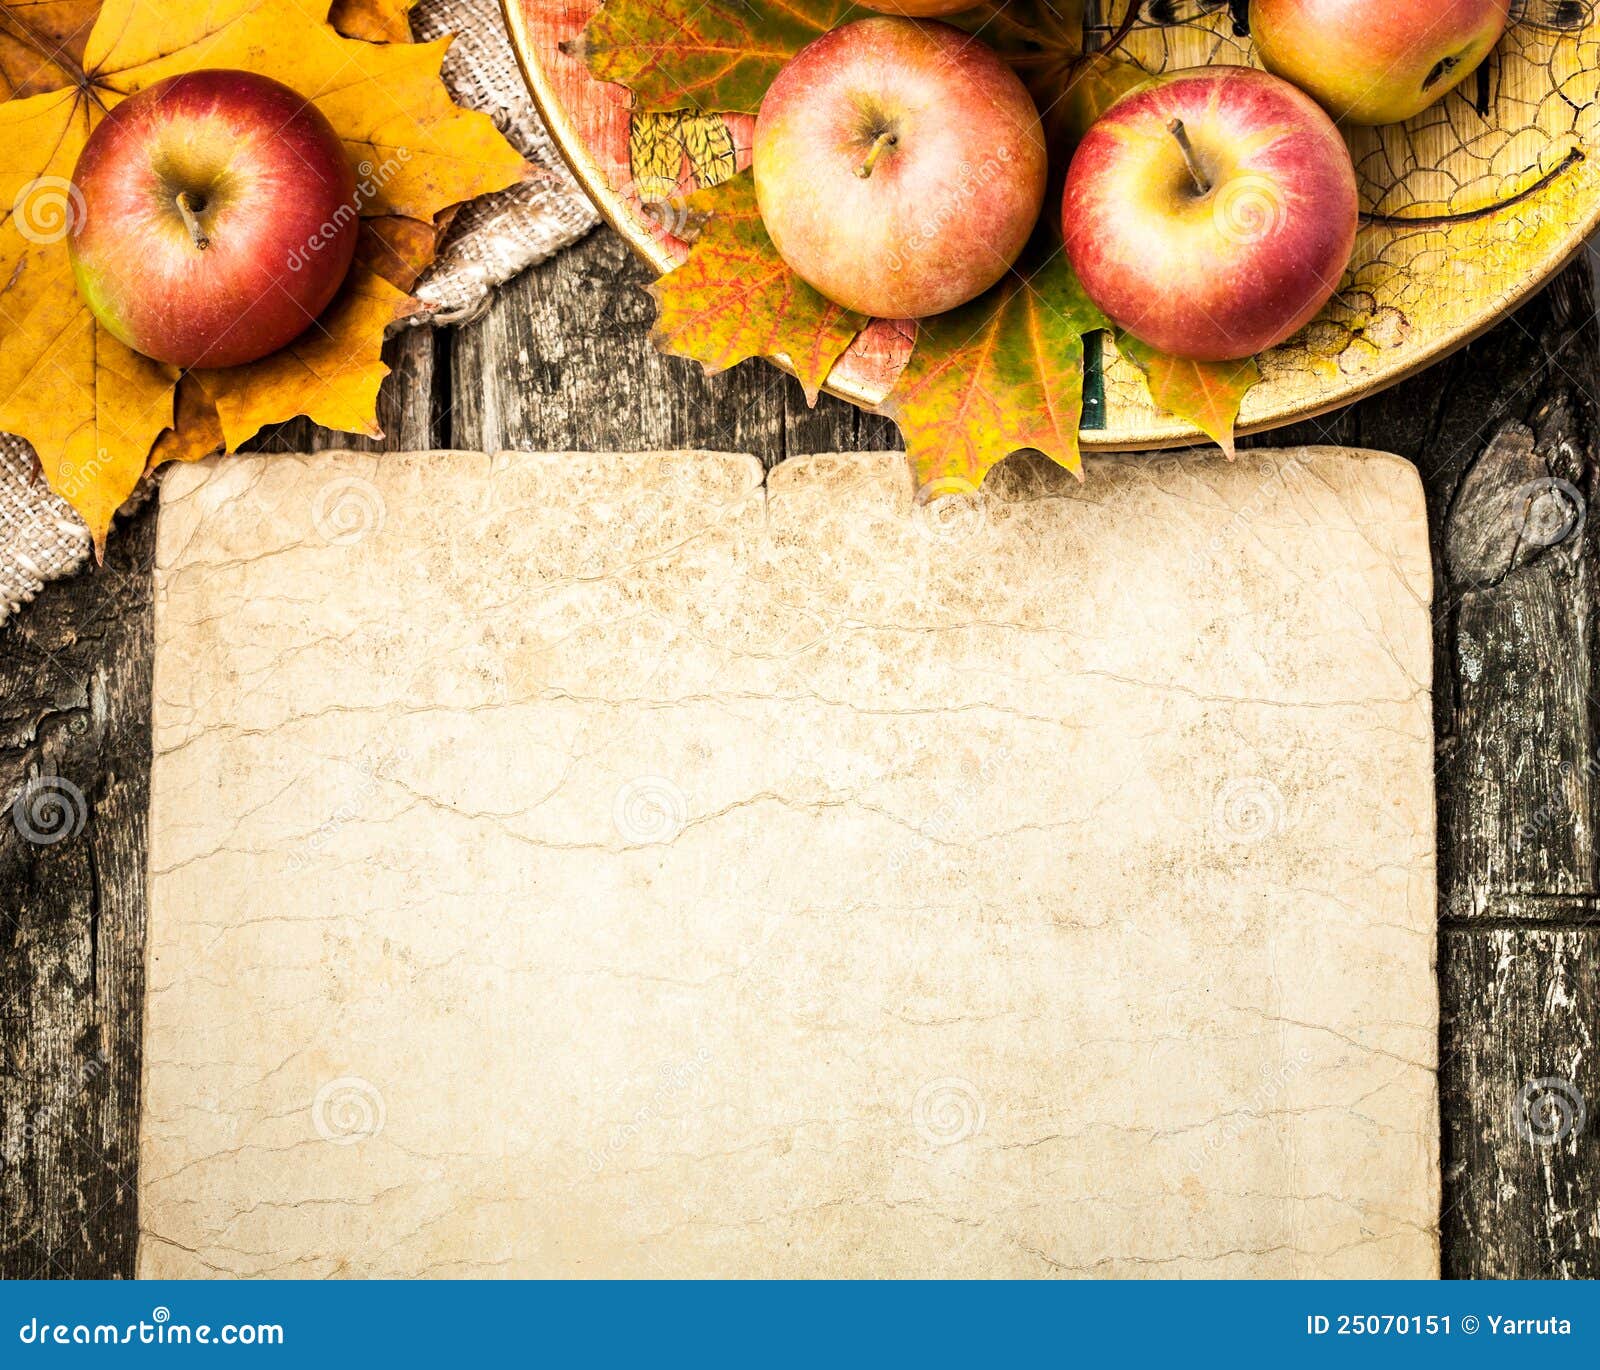 Autumn Border From Apples And Leaves Stock Image - Image 